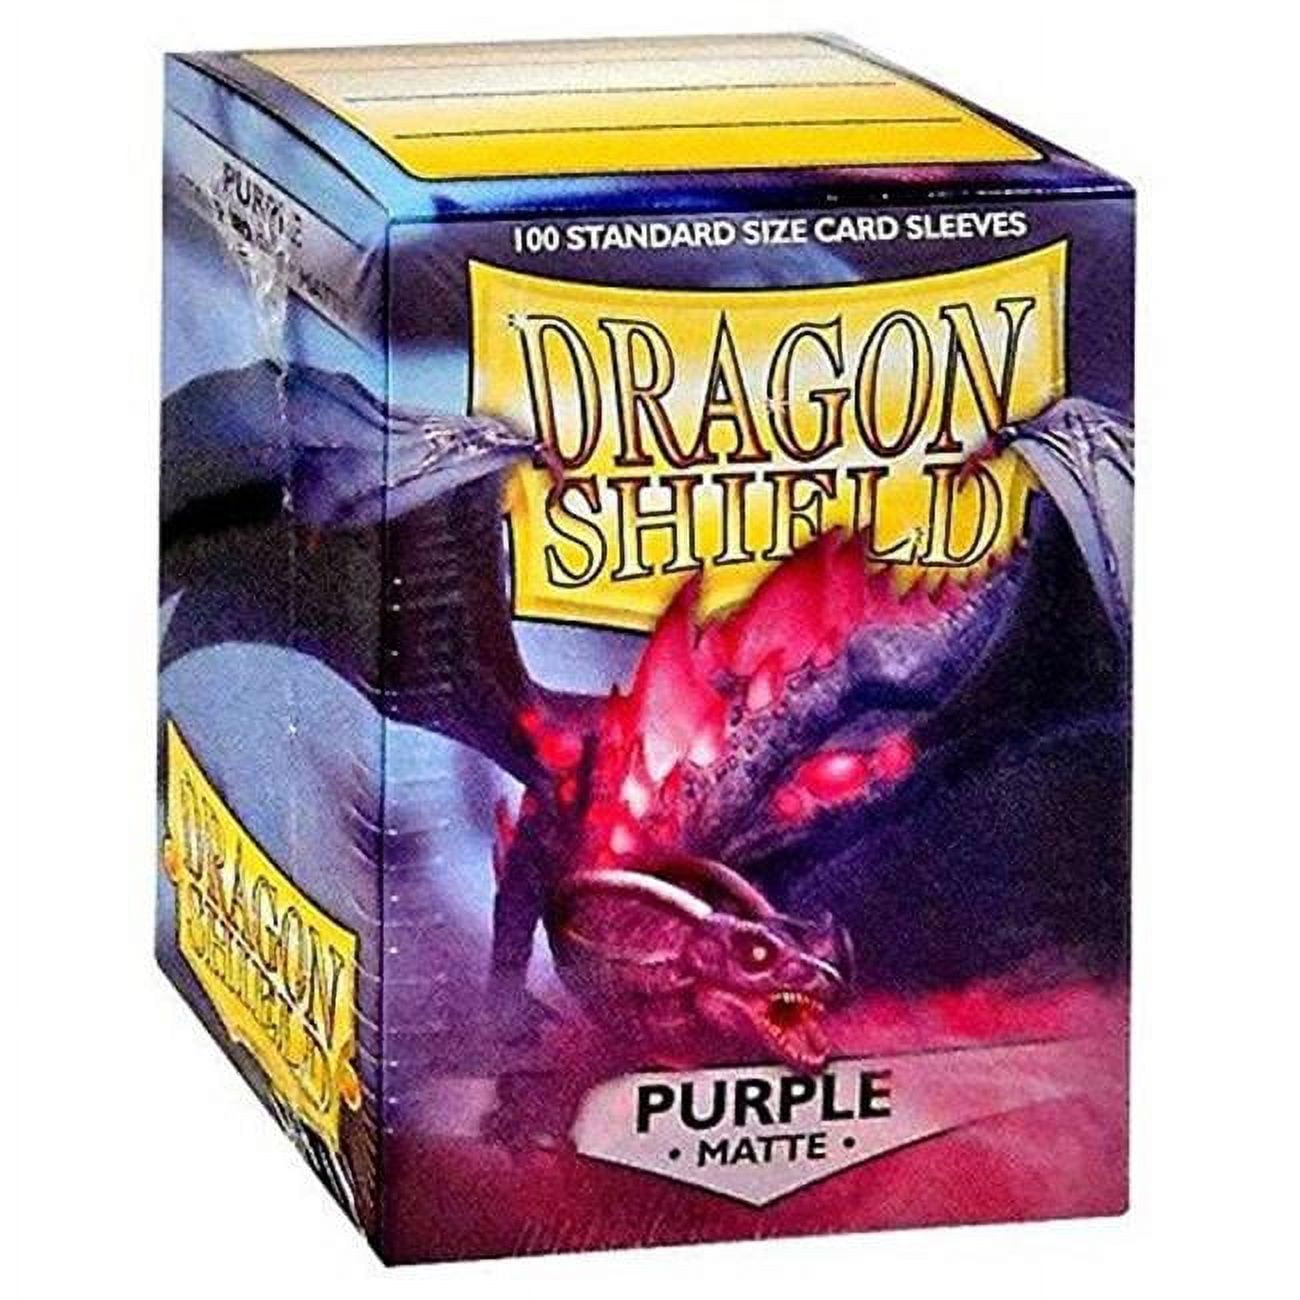 Picture of Arcane Tinmen ATM11009 DP Dragon Shield Card Sleeves, Matte Purple - 100 Count